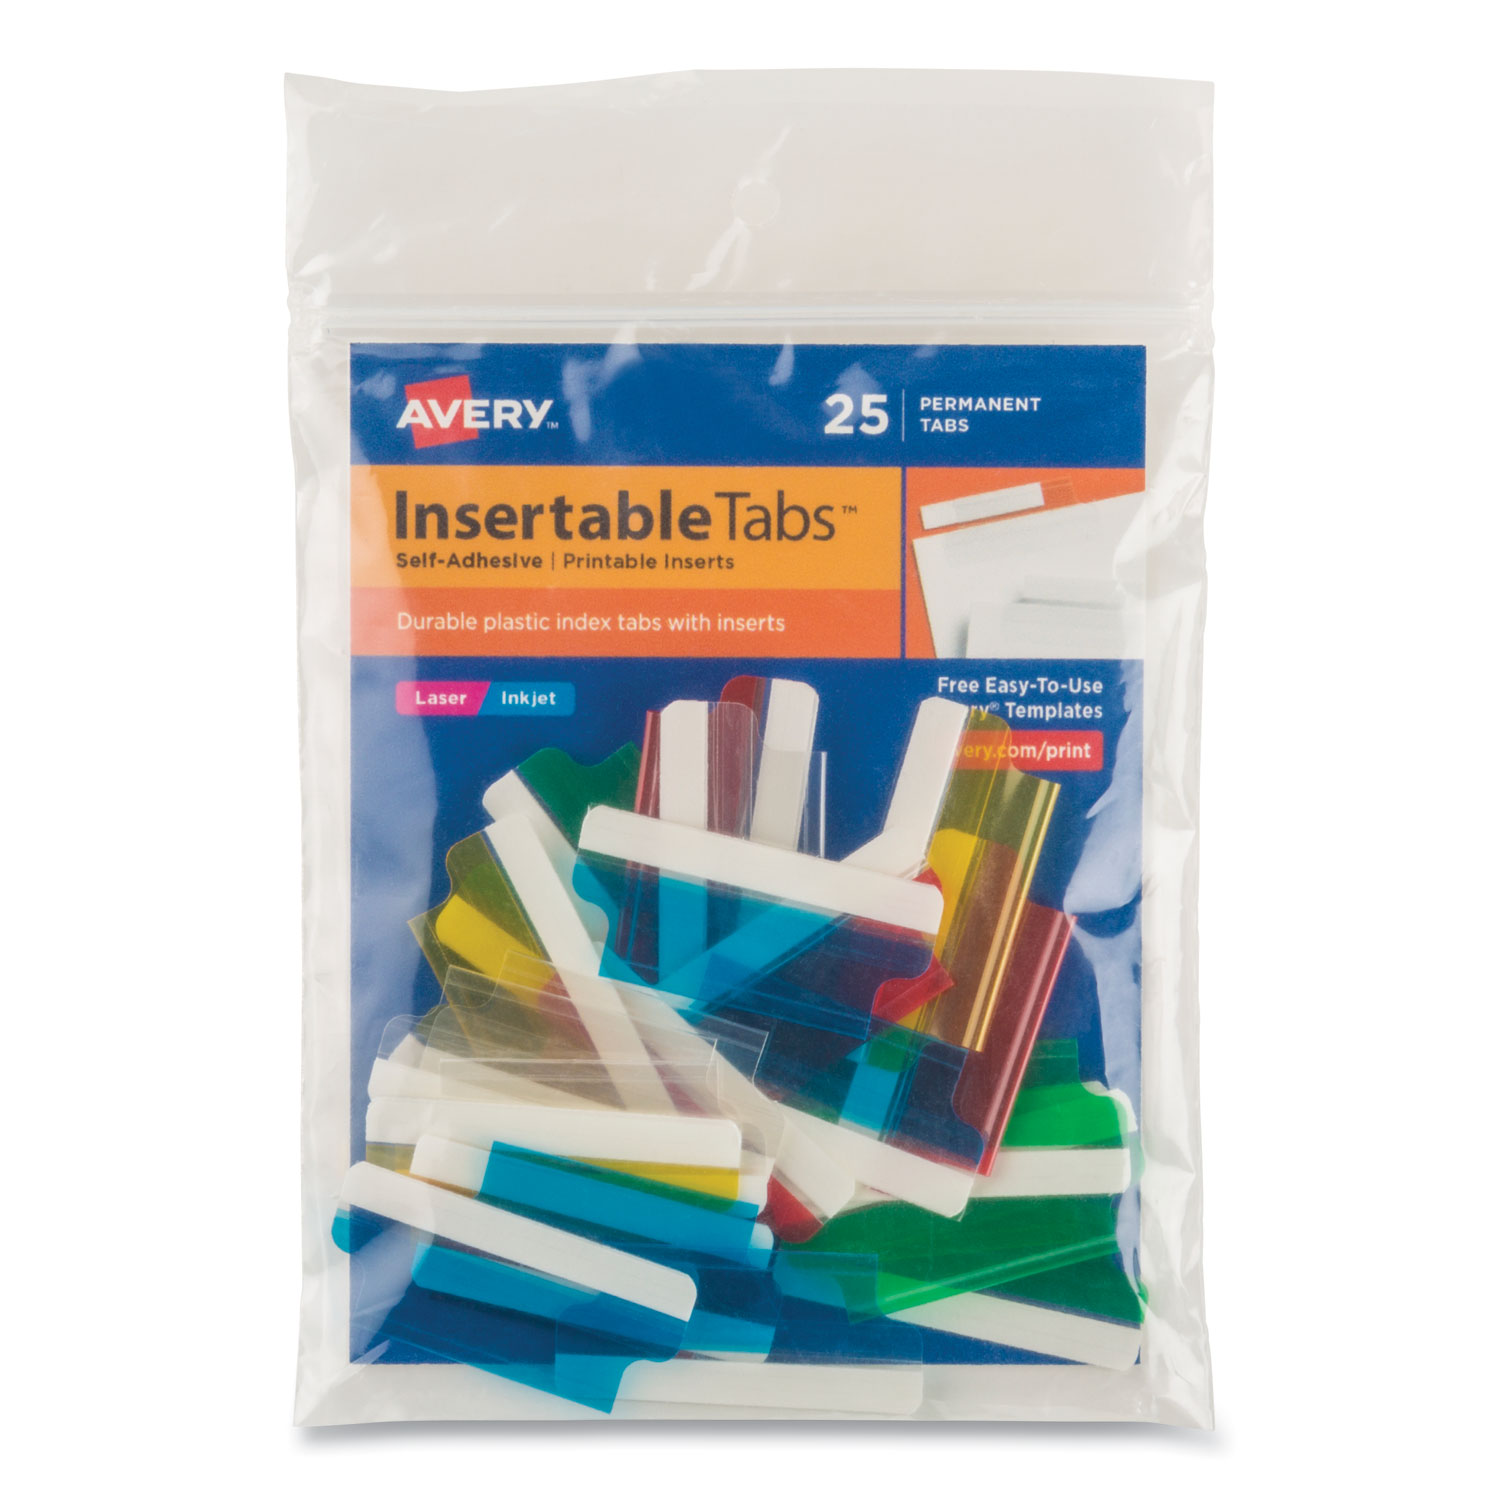  Avery 16228 Insertable Index Tabs with Printable Inserts, 1/5-Cut Tabs, Assorted Colors, 1.5 Wide, 25/Pack (AVE16228) 